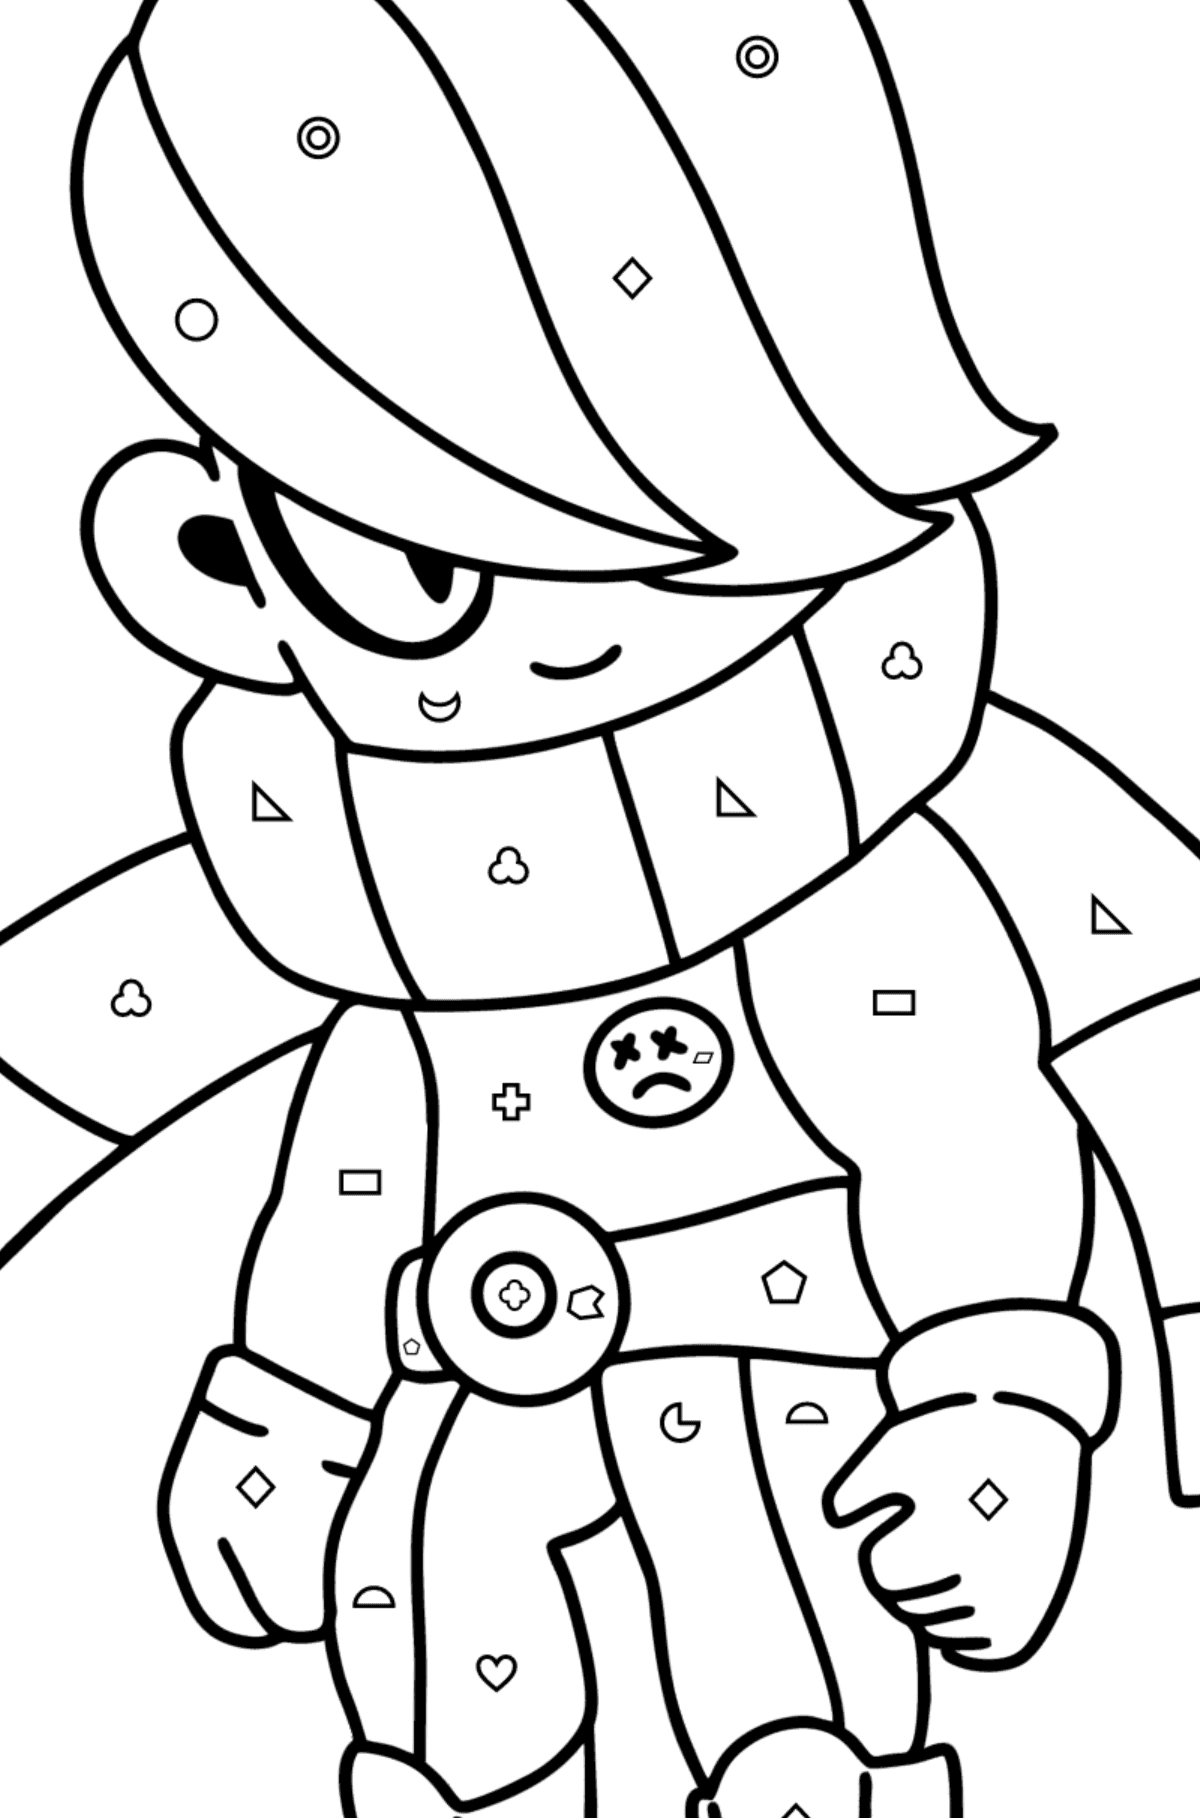 Brawl Stars Edgar coloring page - Coloring by Geometric Shapes for Kids